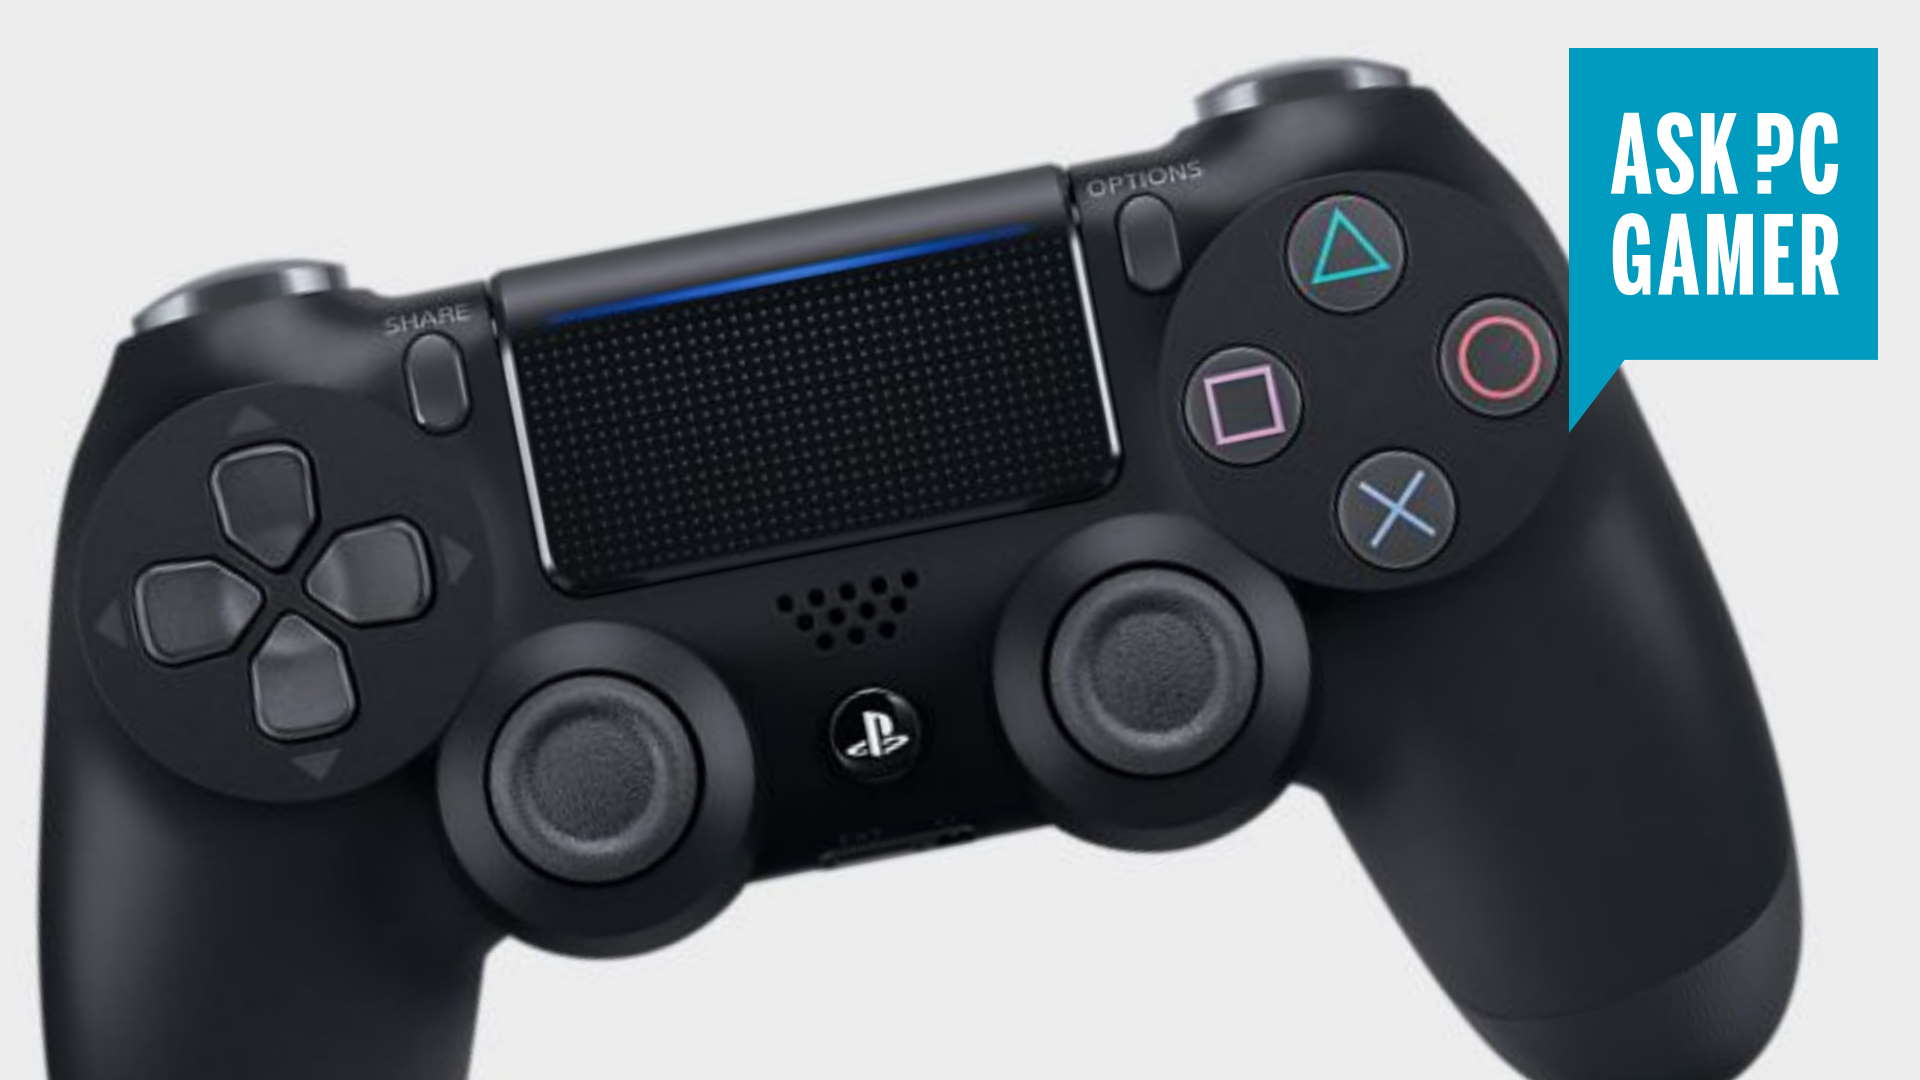 møde Hotellet Symposium How to use a PS4 controller on PC: | PC Gamer